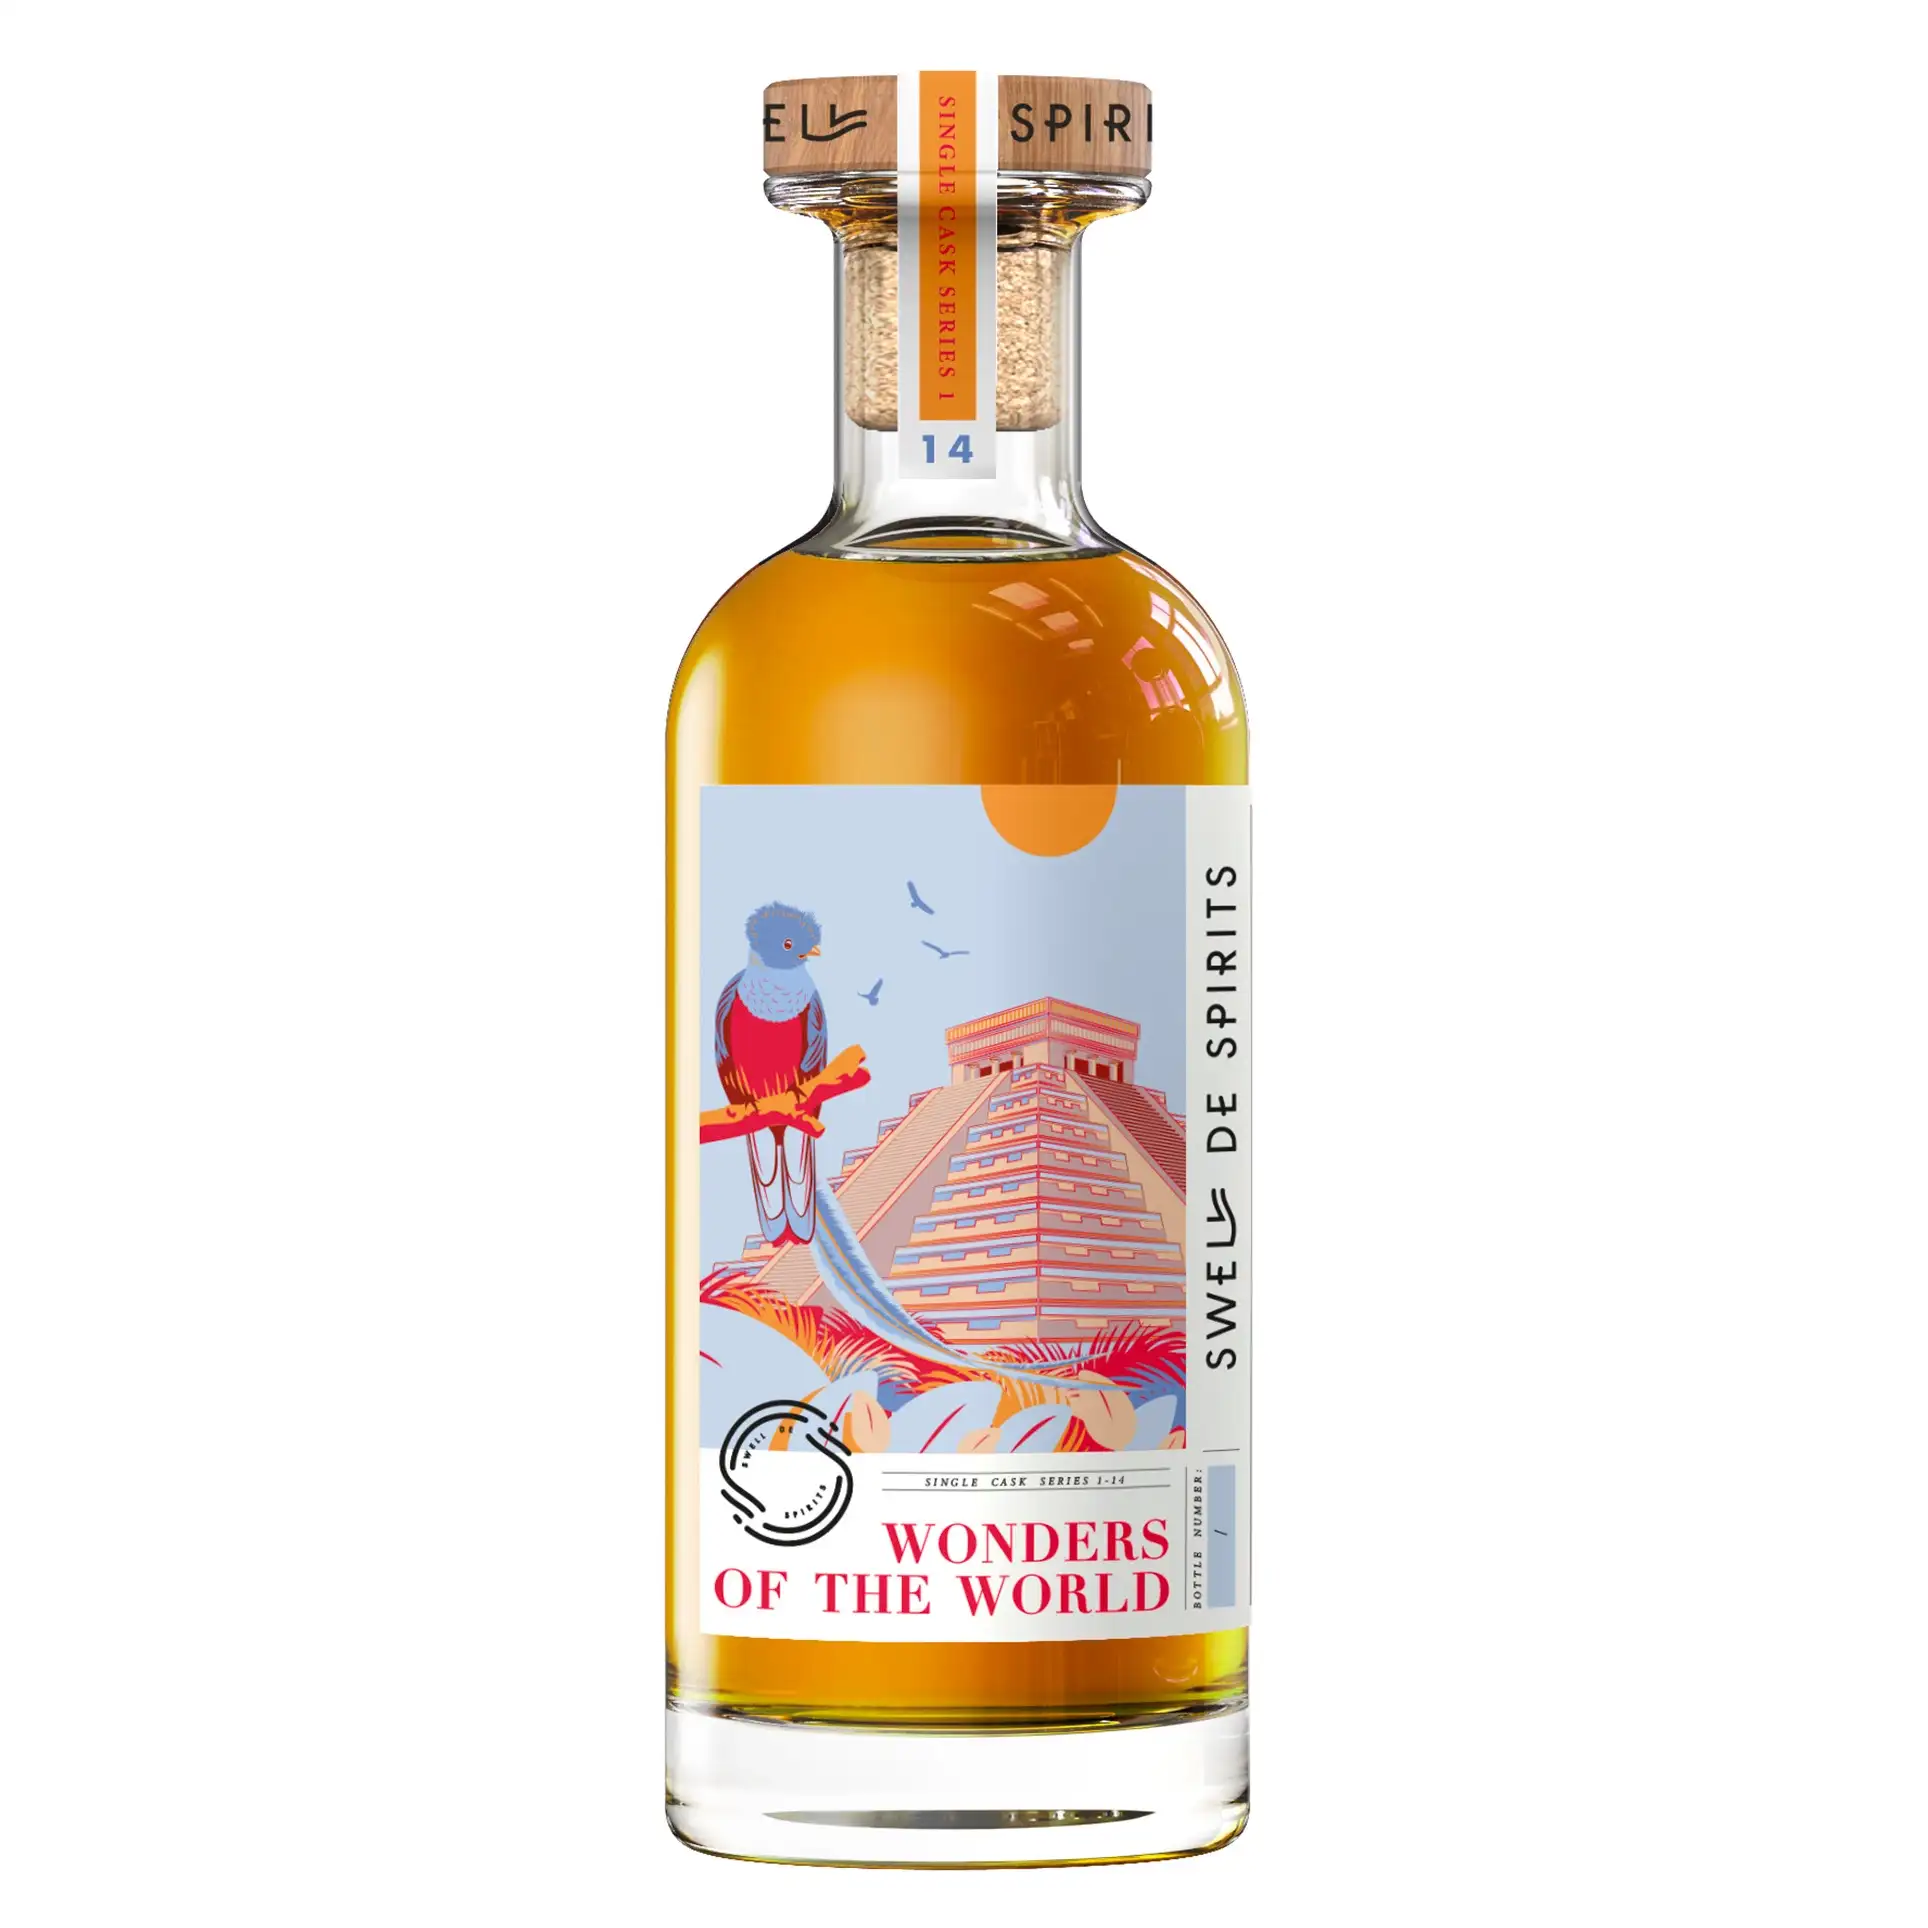 Image of the front of the bottle of the rum Wonders of the World